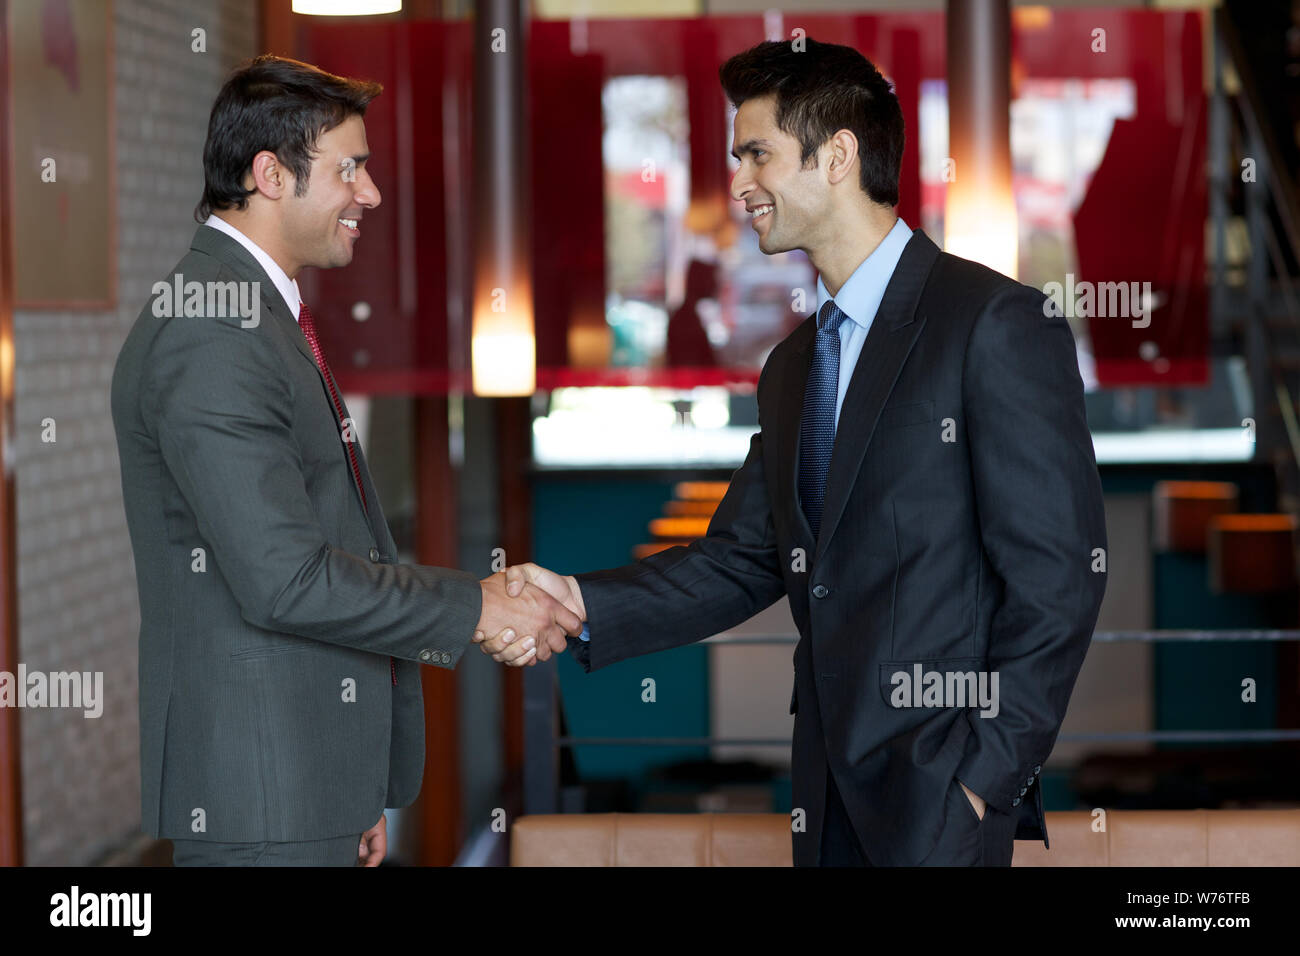 Two business executives shaking hands Stock Photo